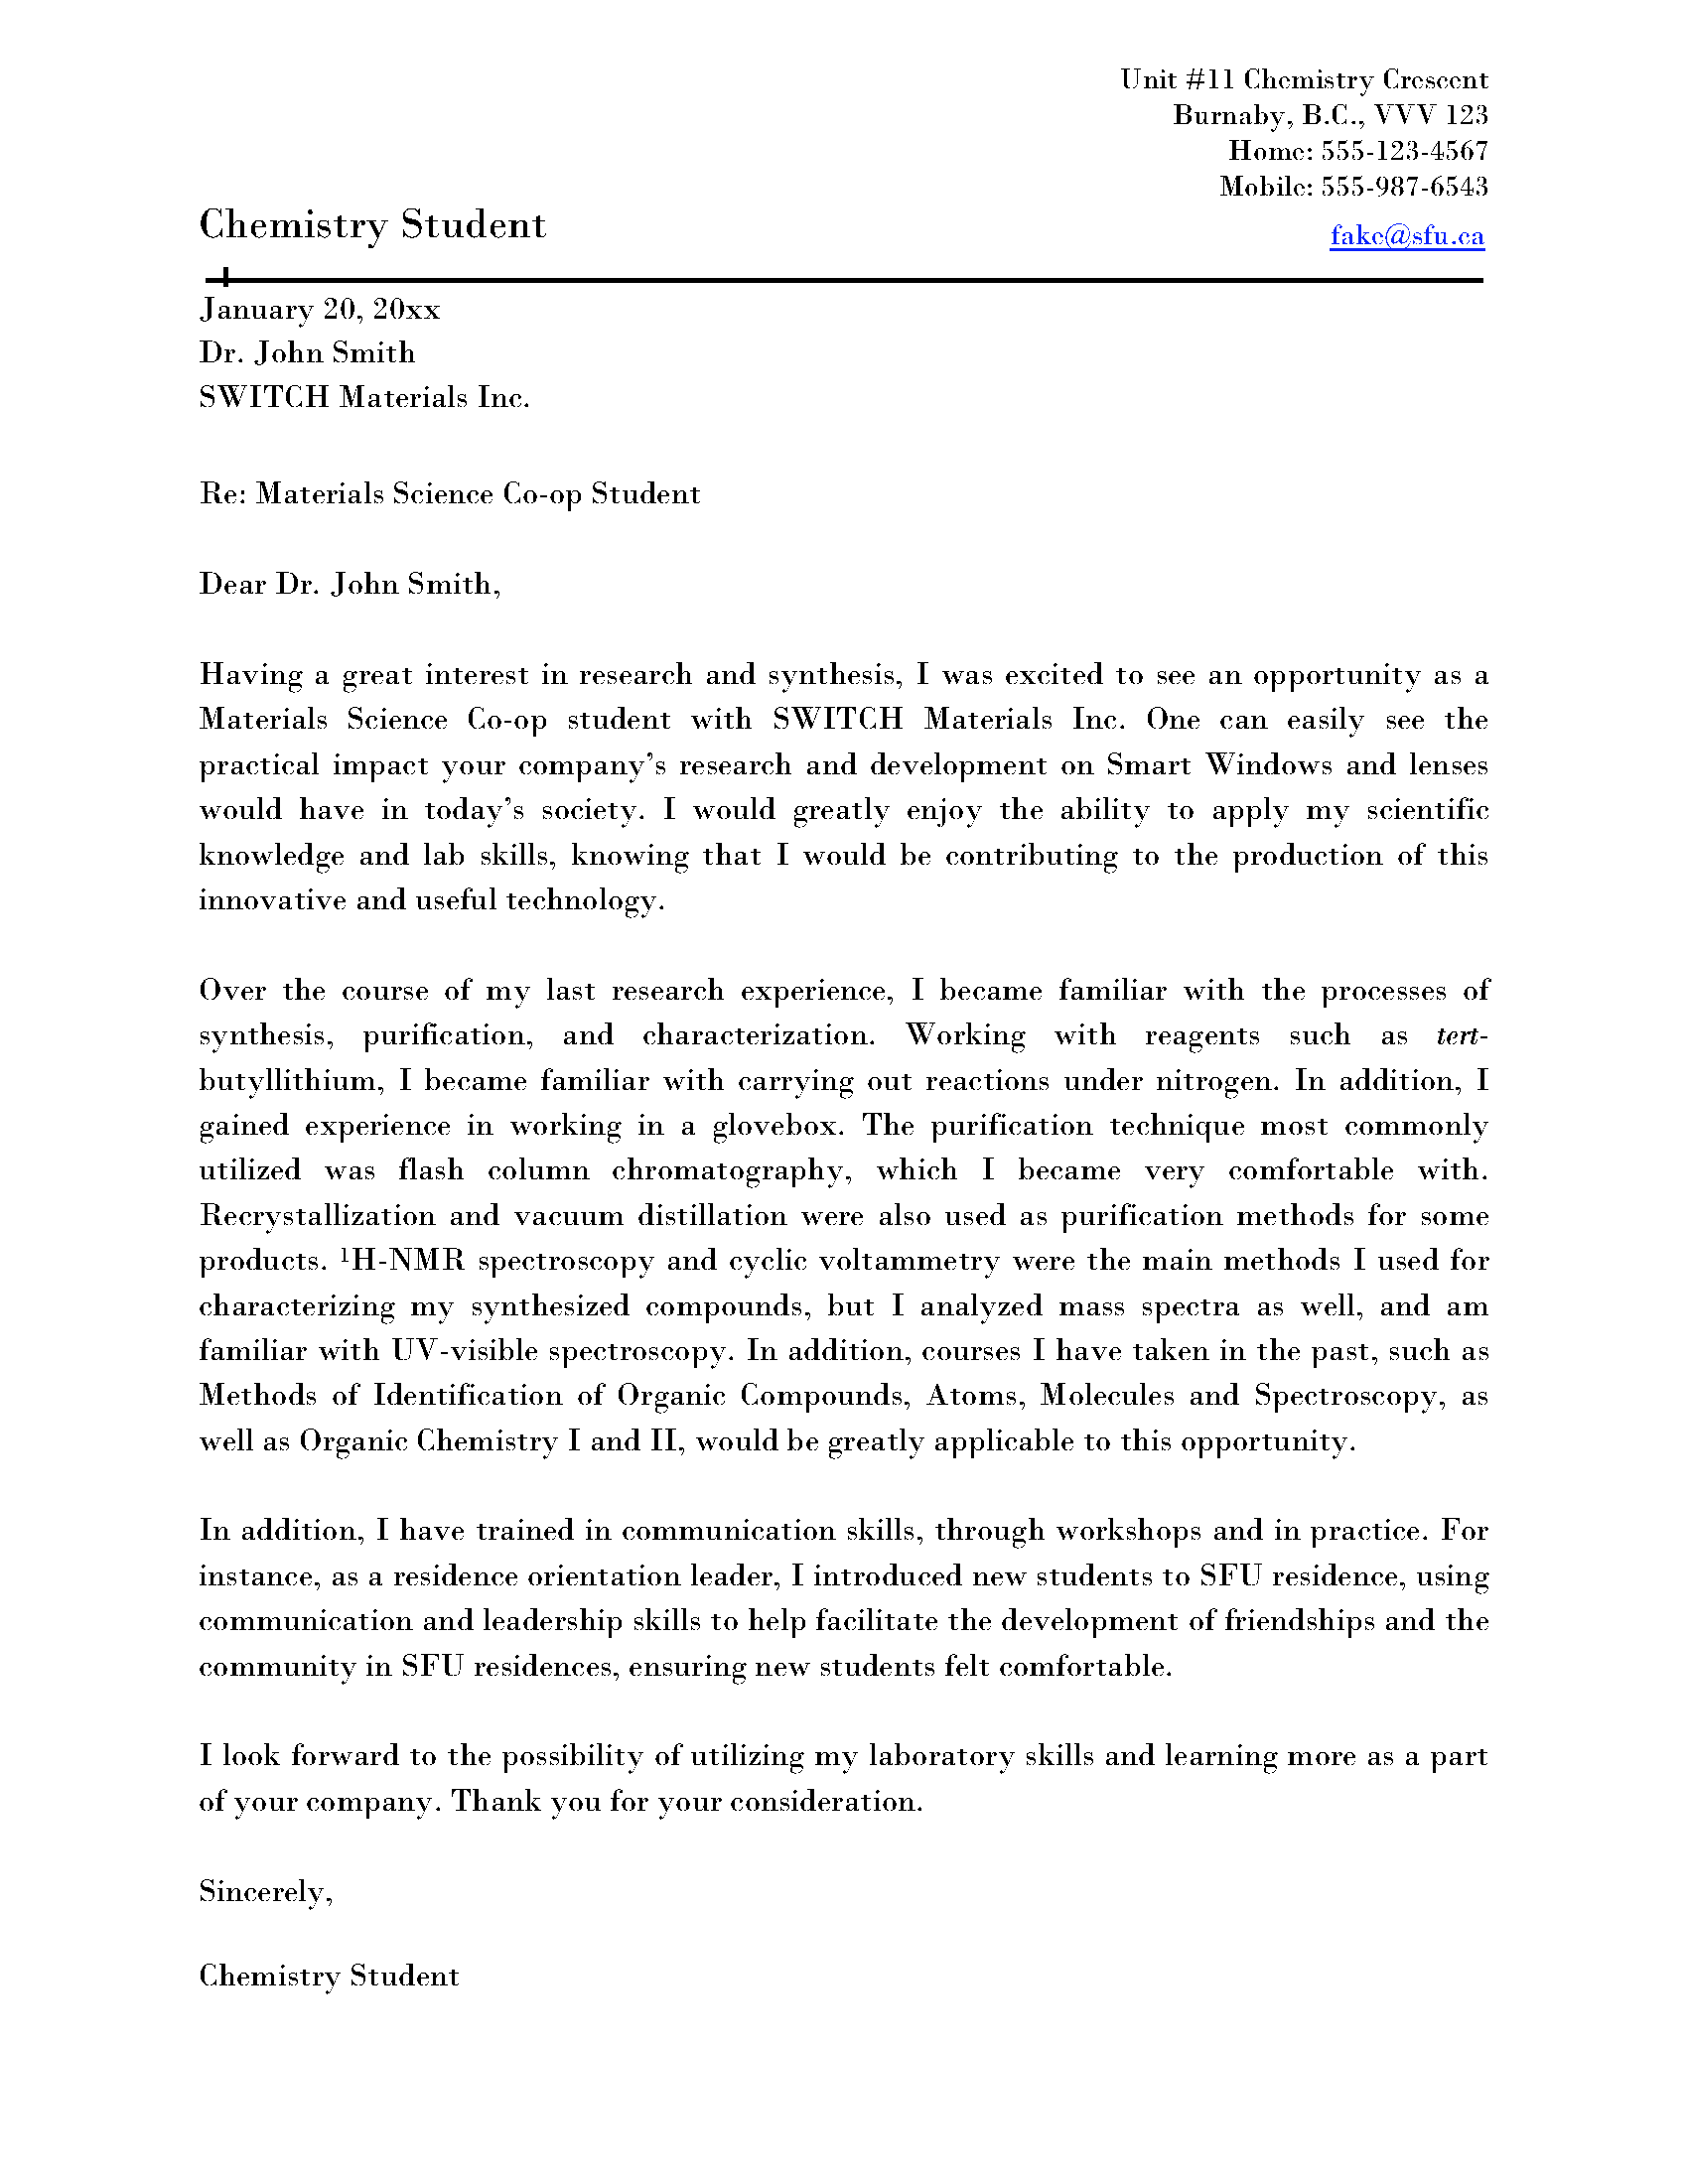 example cover letter for chemistry job